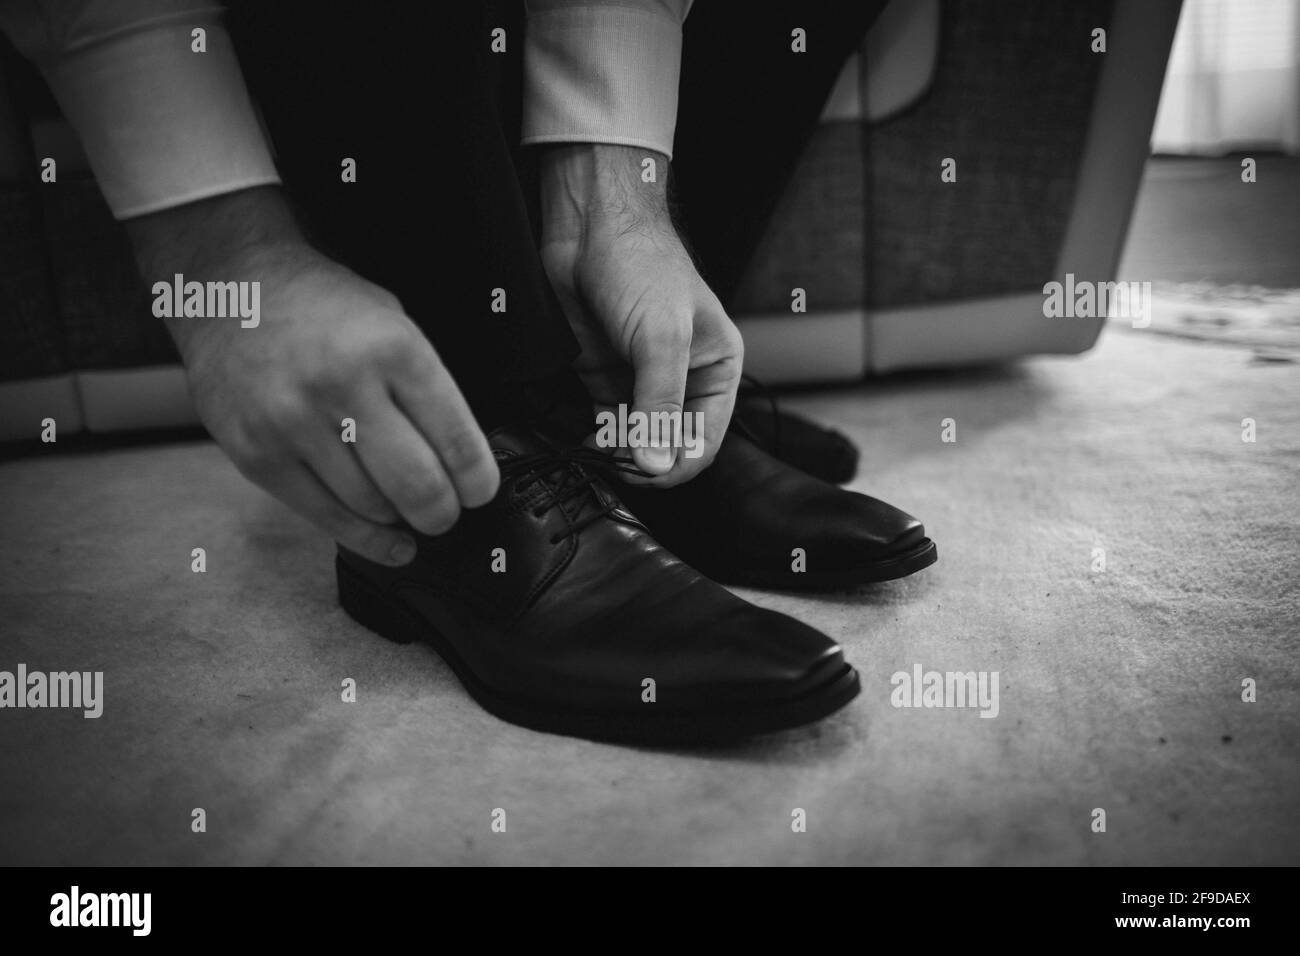 Grayscale shot of a man tying his leather shoes Stock Photo